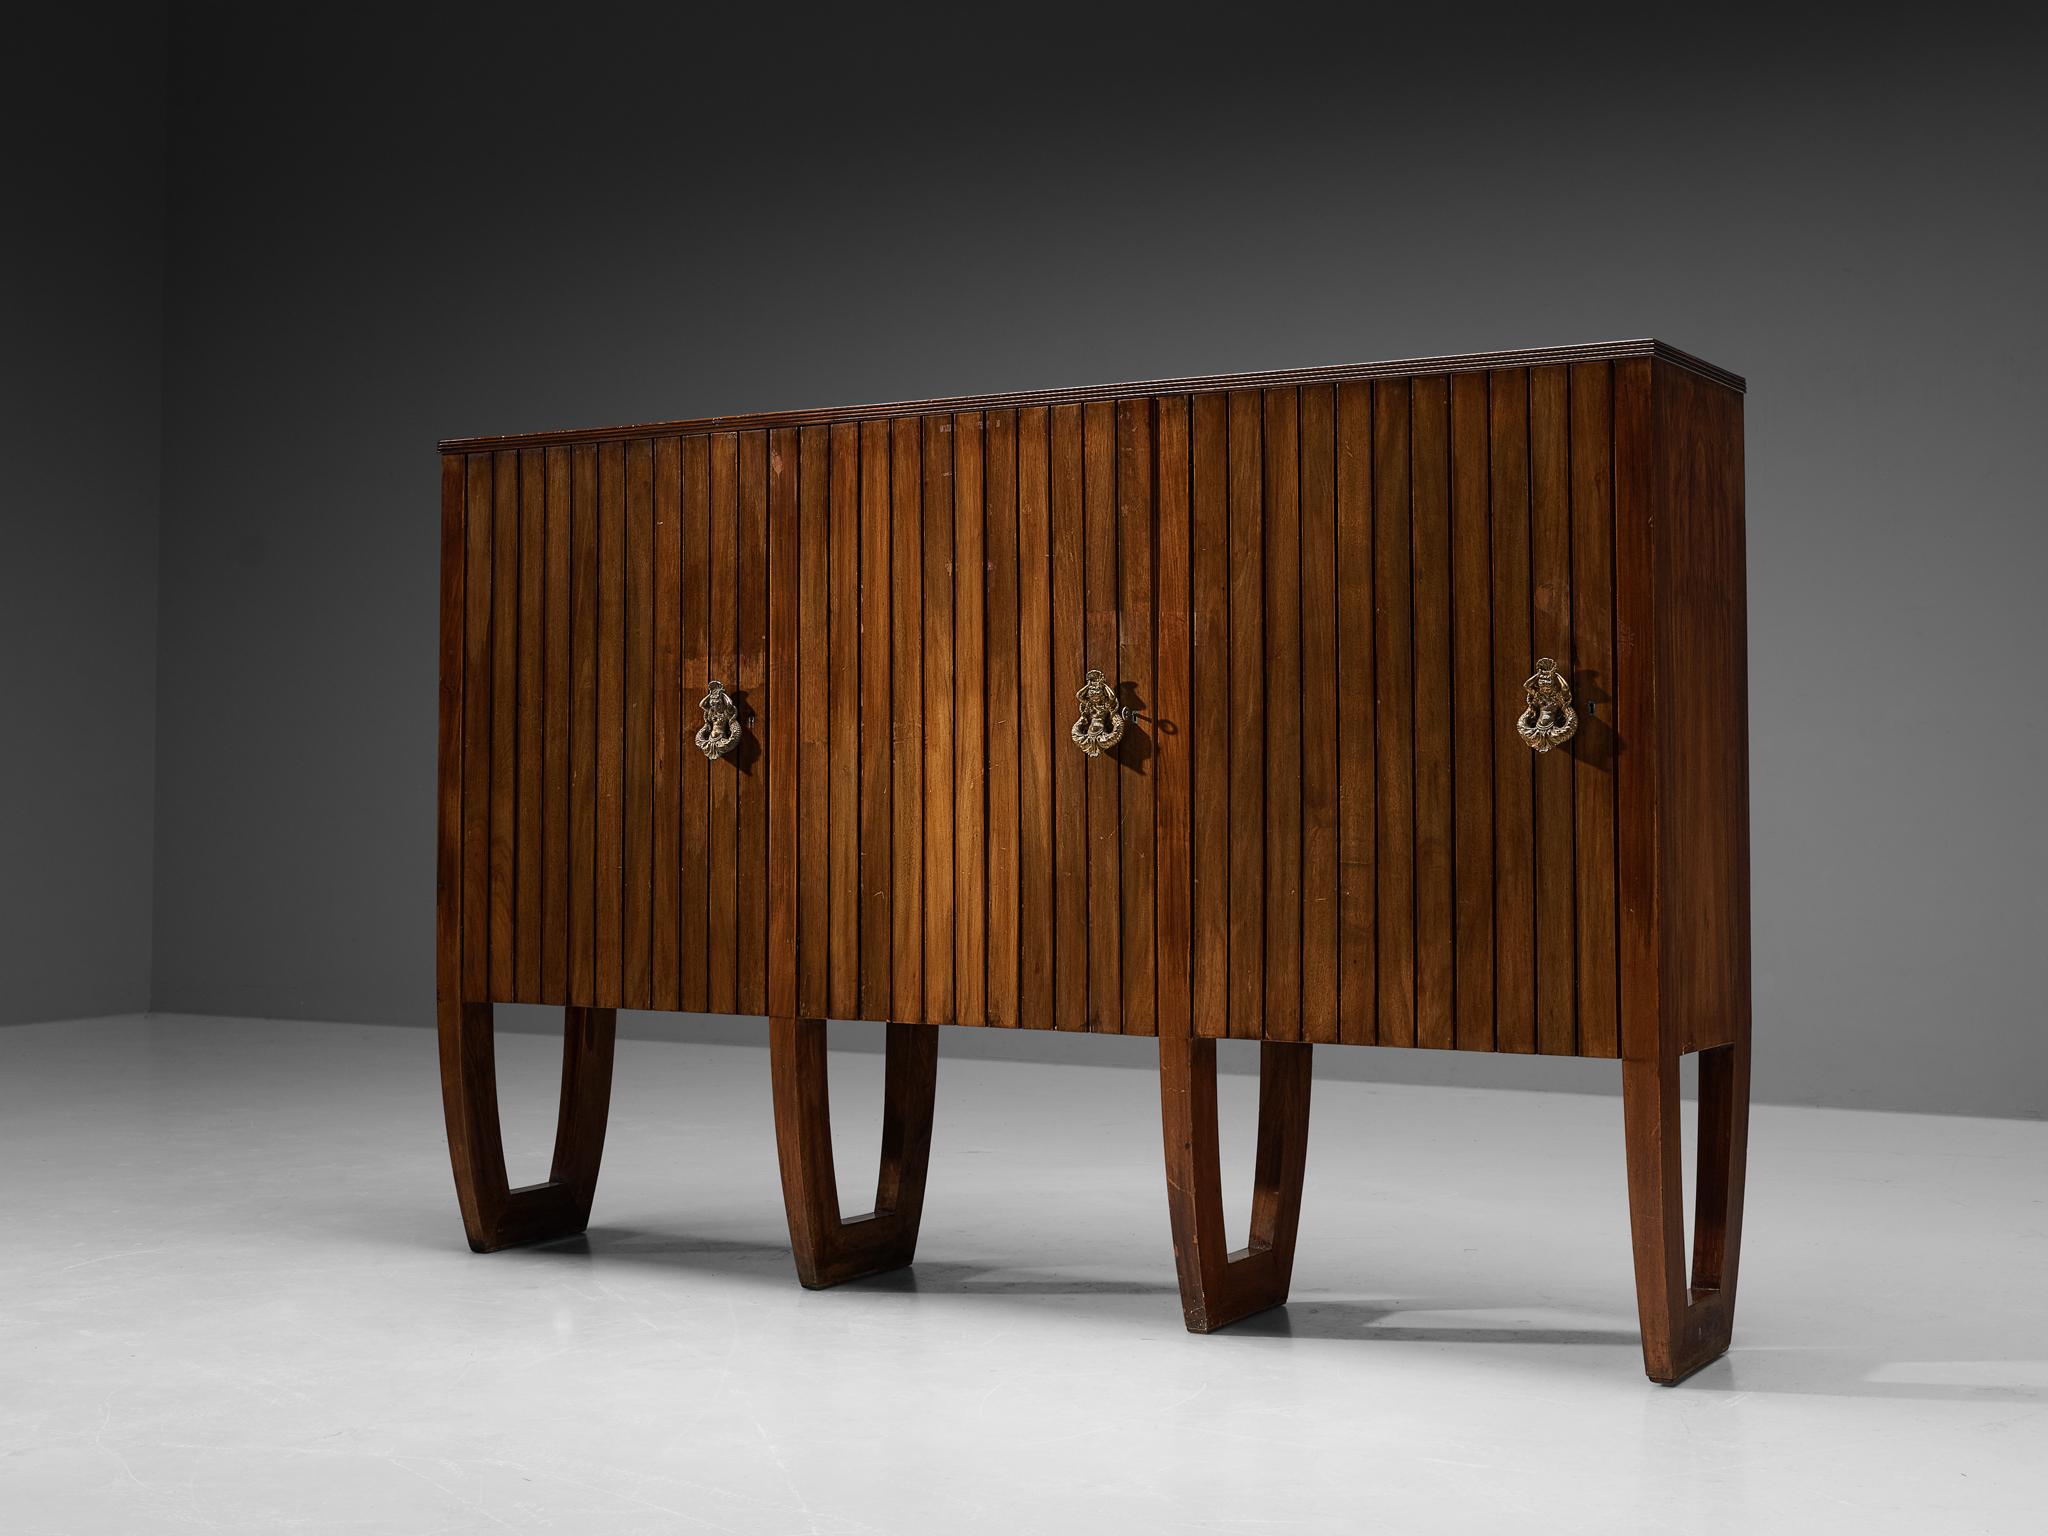 Antonio Cassi Ramelli, sideboard, walnut, brass, Italy, 1940s

This elegant Art Deco case piece is designed by the Italian designer Antonio Cassi Ramelli; a contemporary of Paulo Buffa and whom he collaborated with during the early period of his